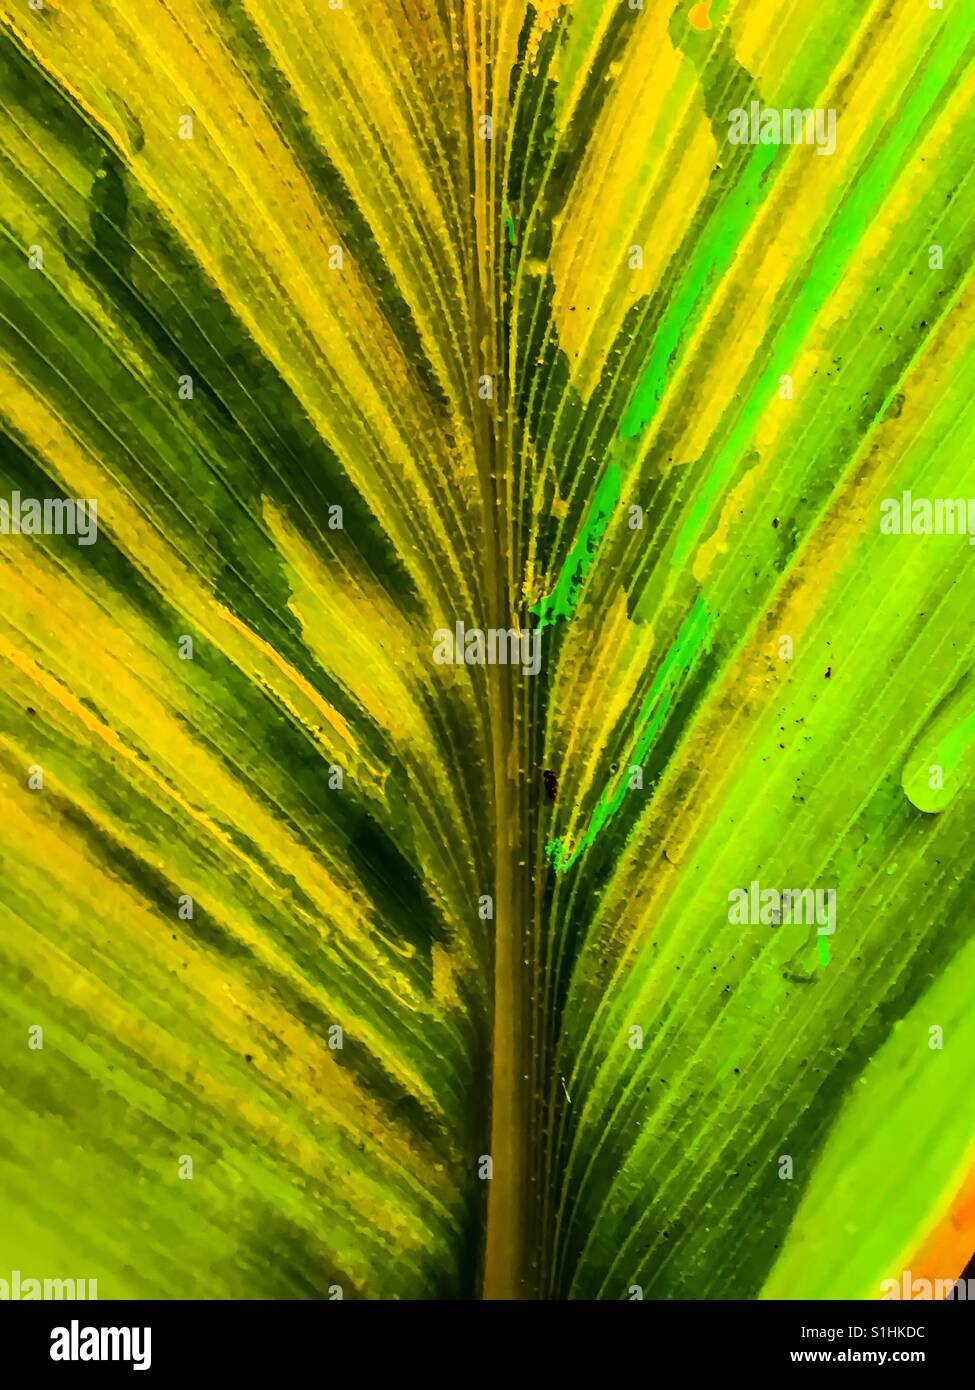 Wet green leaf close up Stock Photo